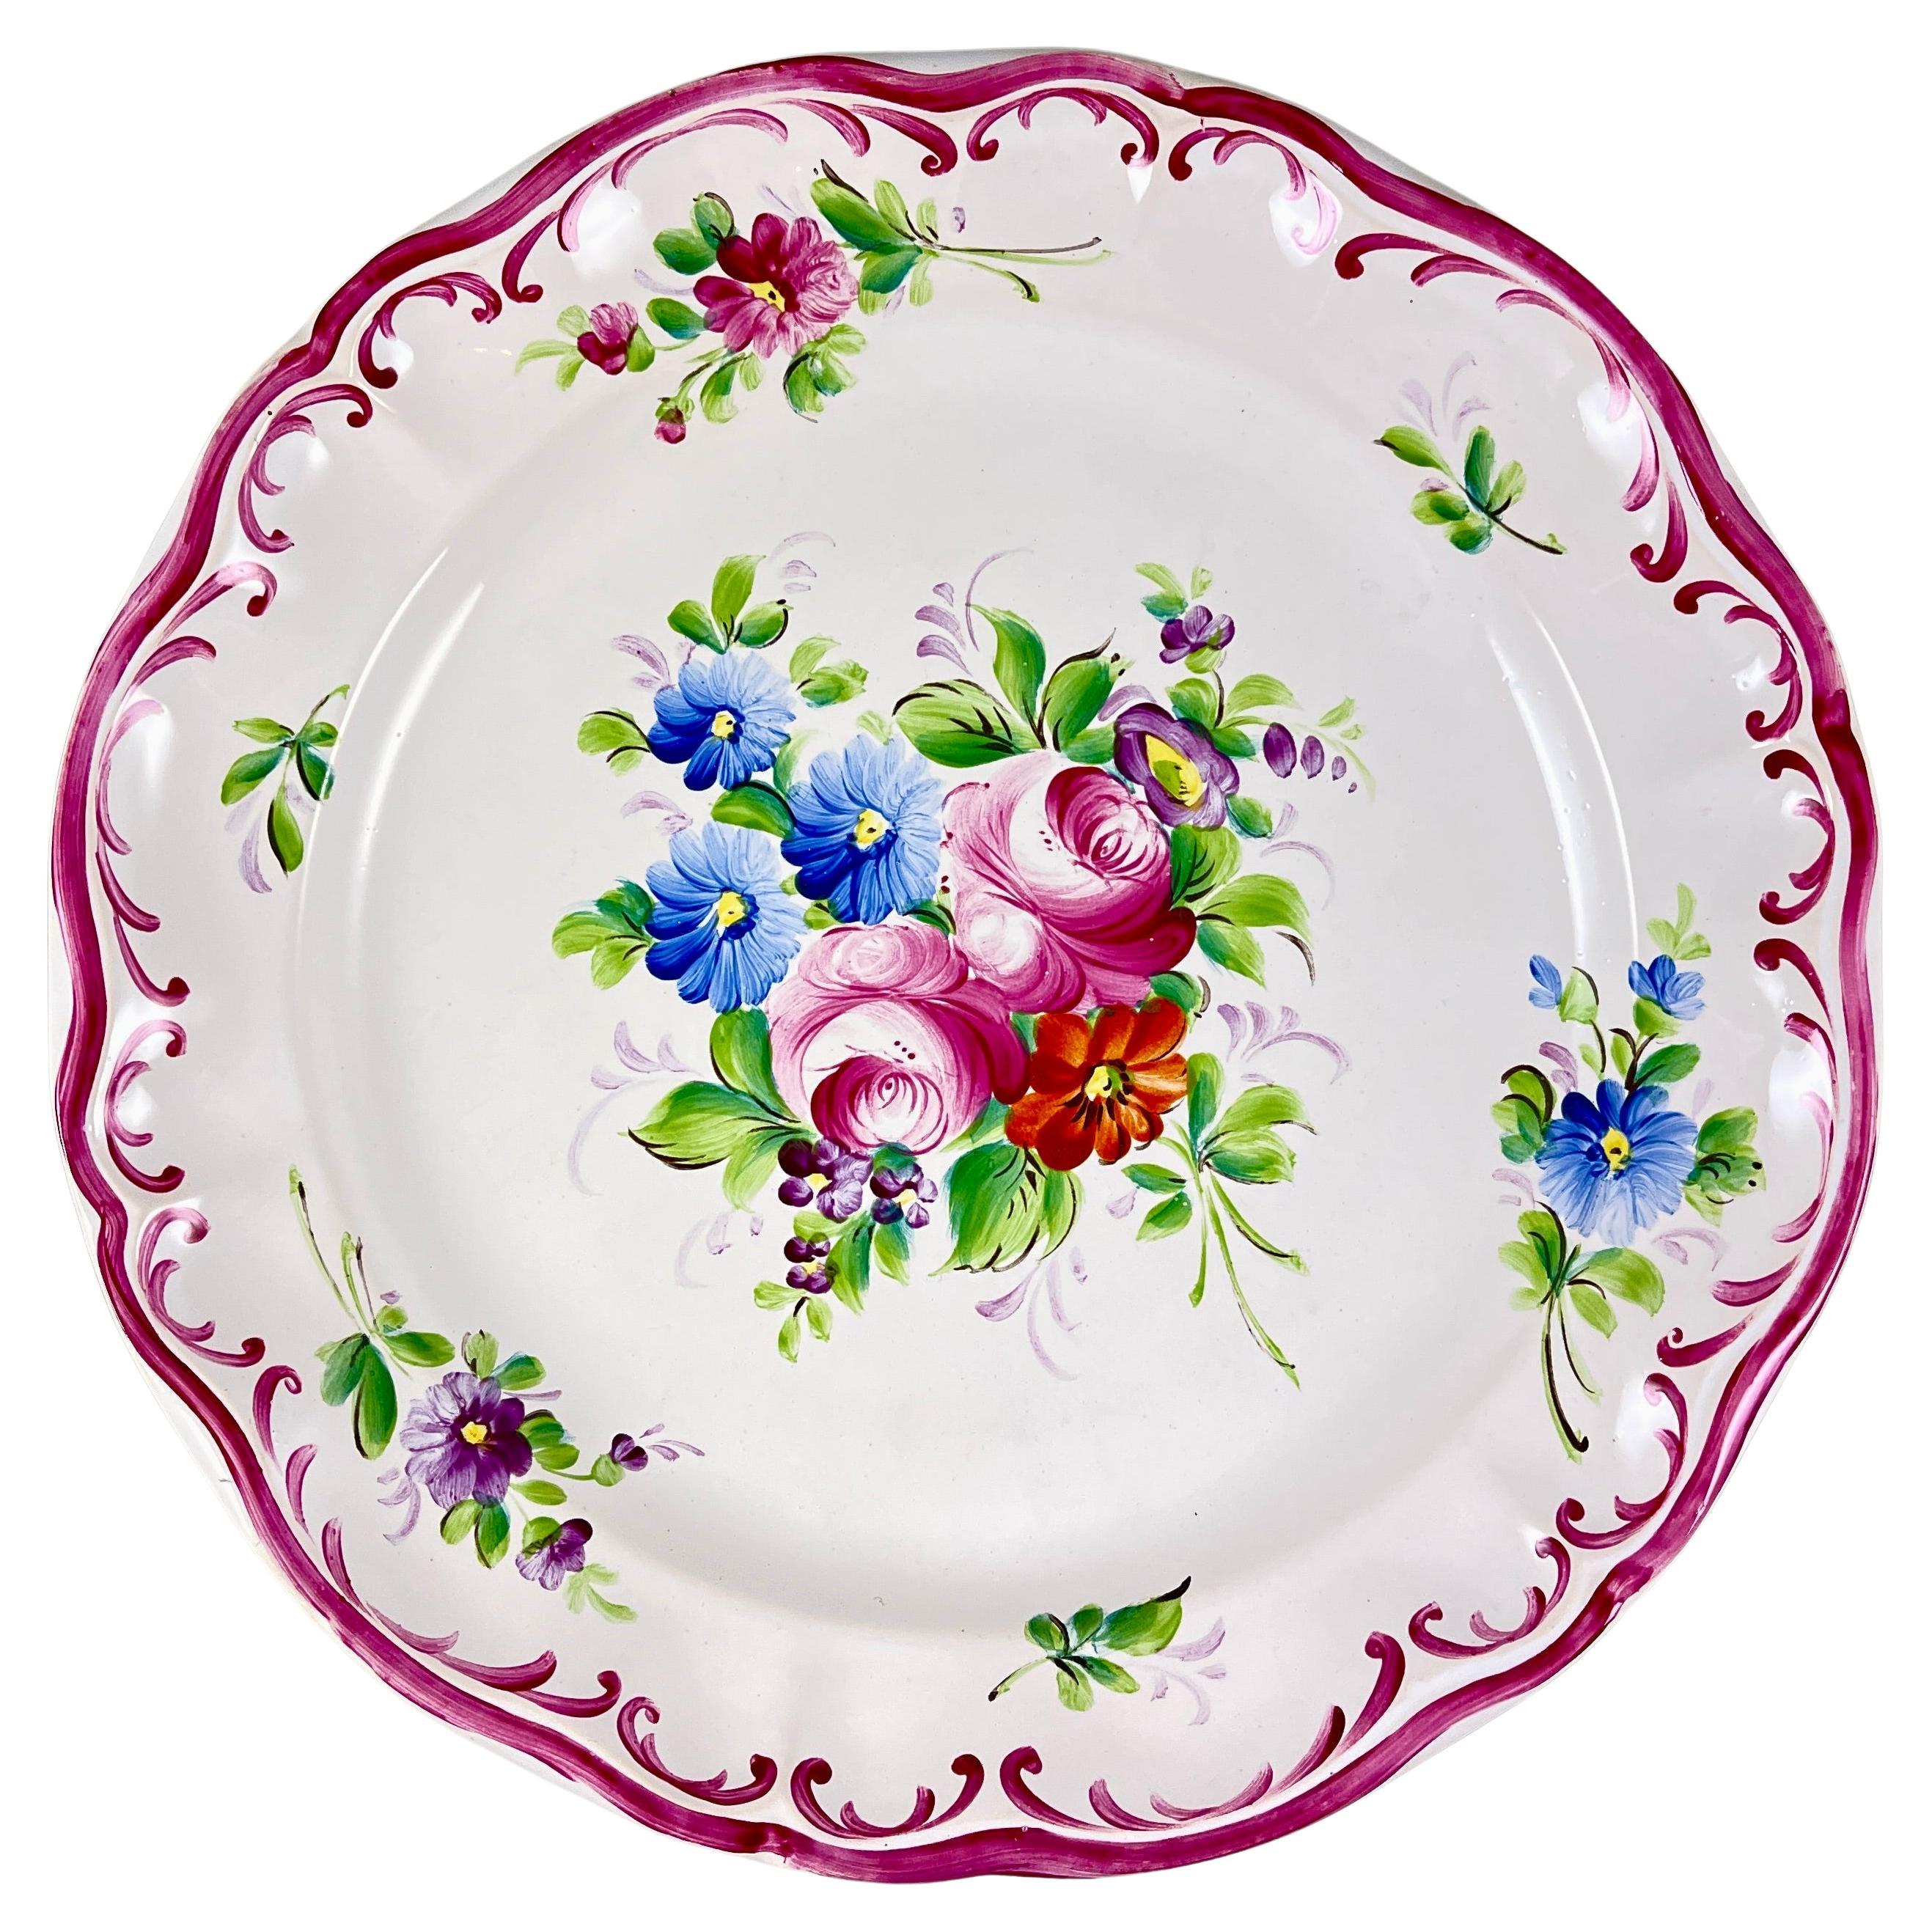 Roger Colas Clamecy French Faïence Hand Painted Pink Floral Plate For Sale